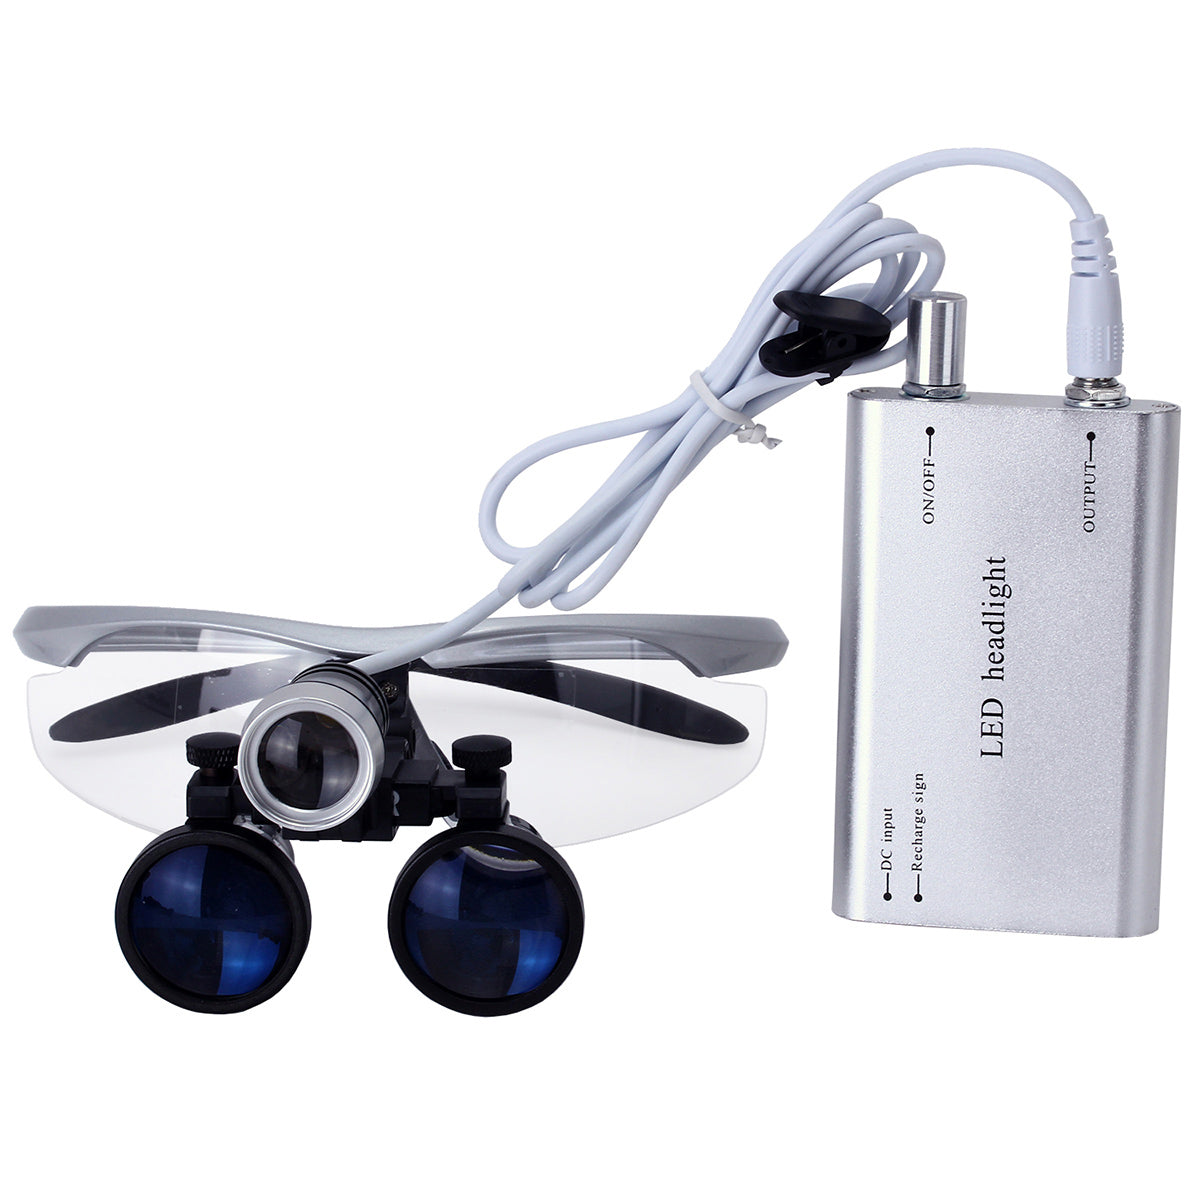 Dental Loupe 3.5X Magnification Binocular Magnifier with Headlight Silver  - pairaydental.com